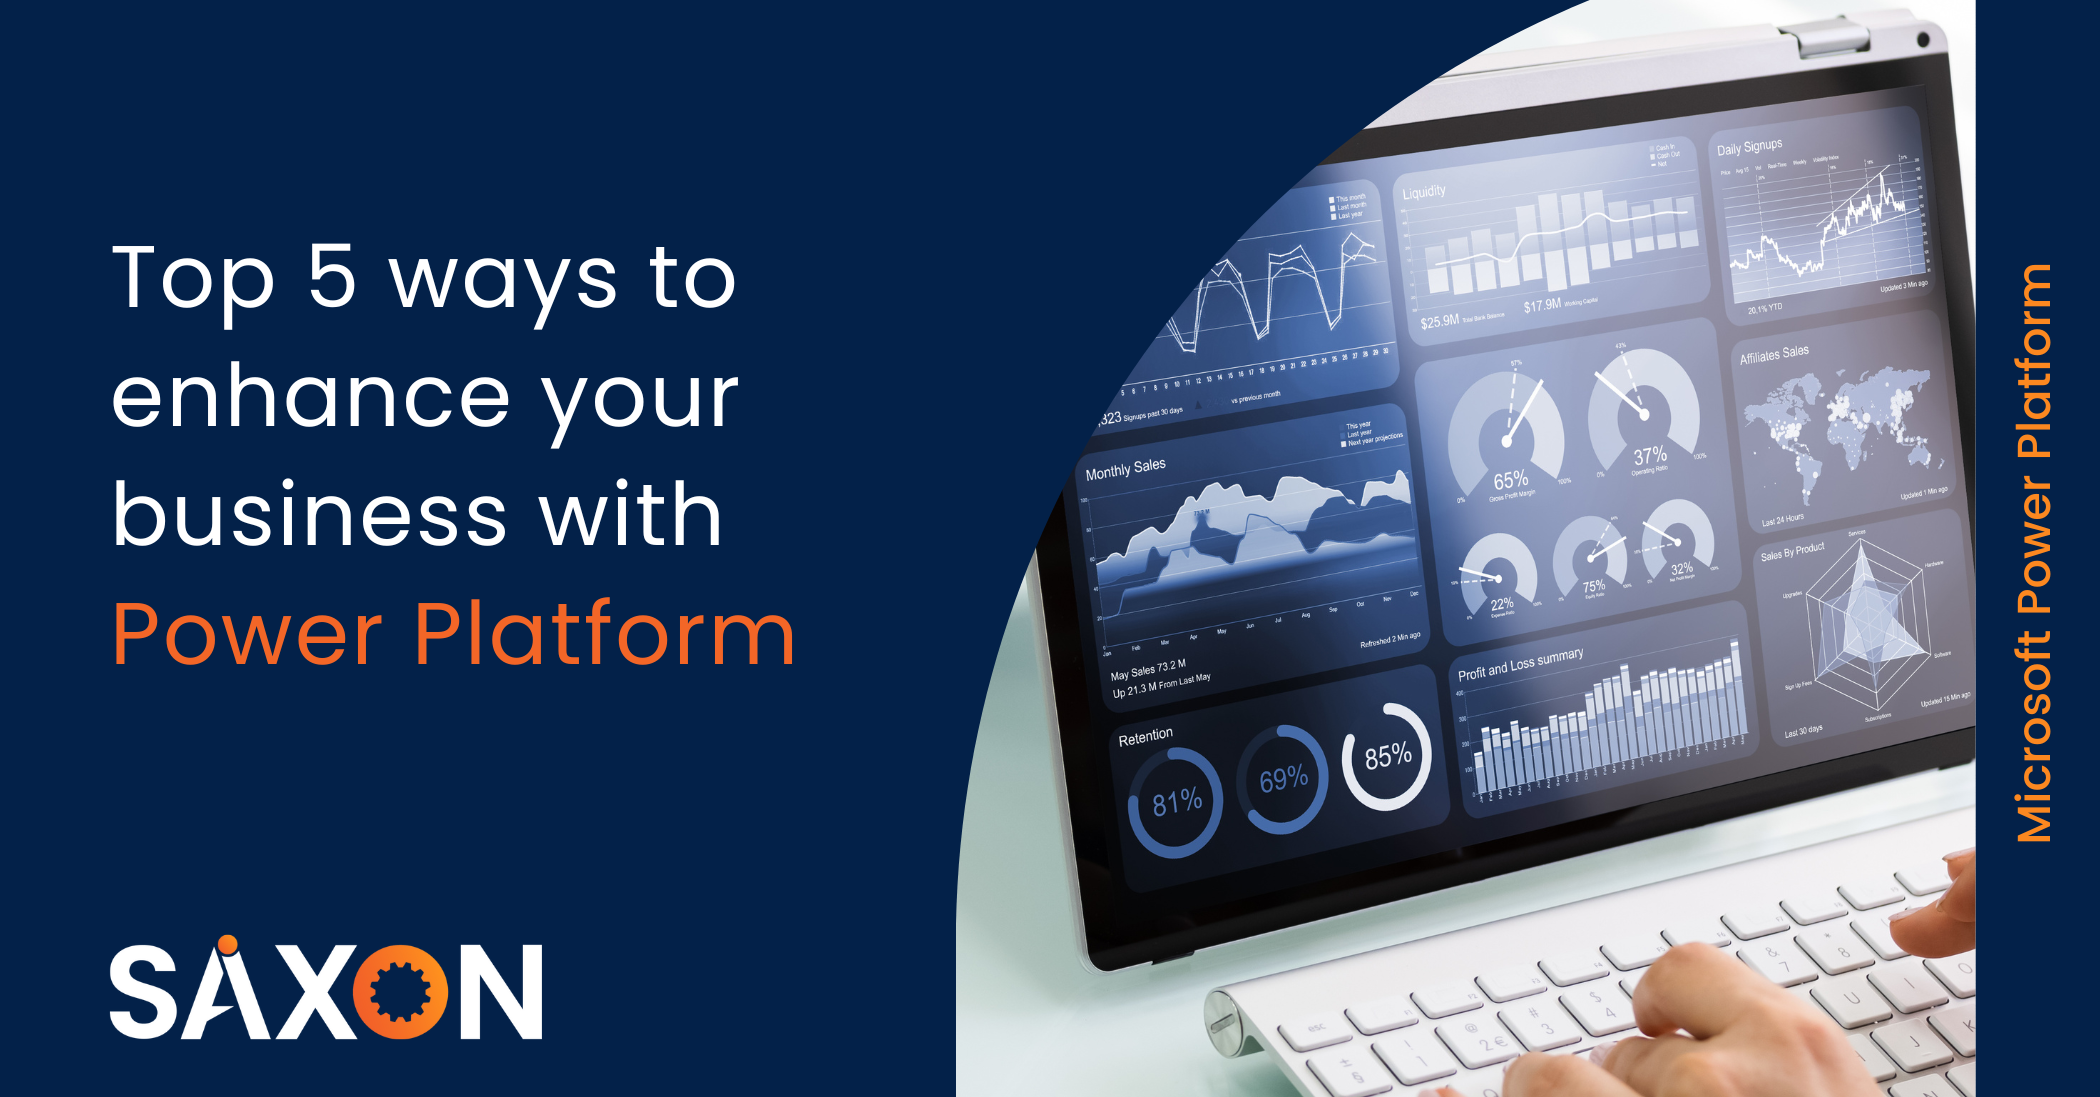 Top 5 ways to enhance your business with Power Platform - Saxon AI